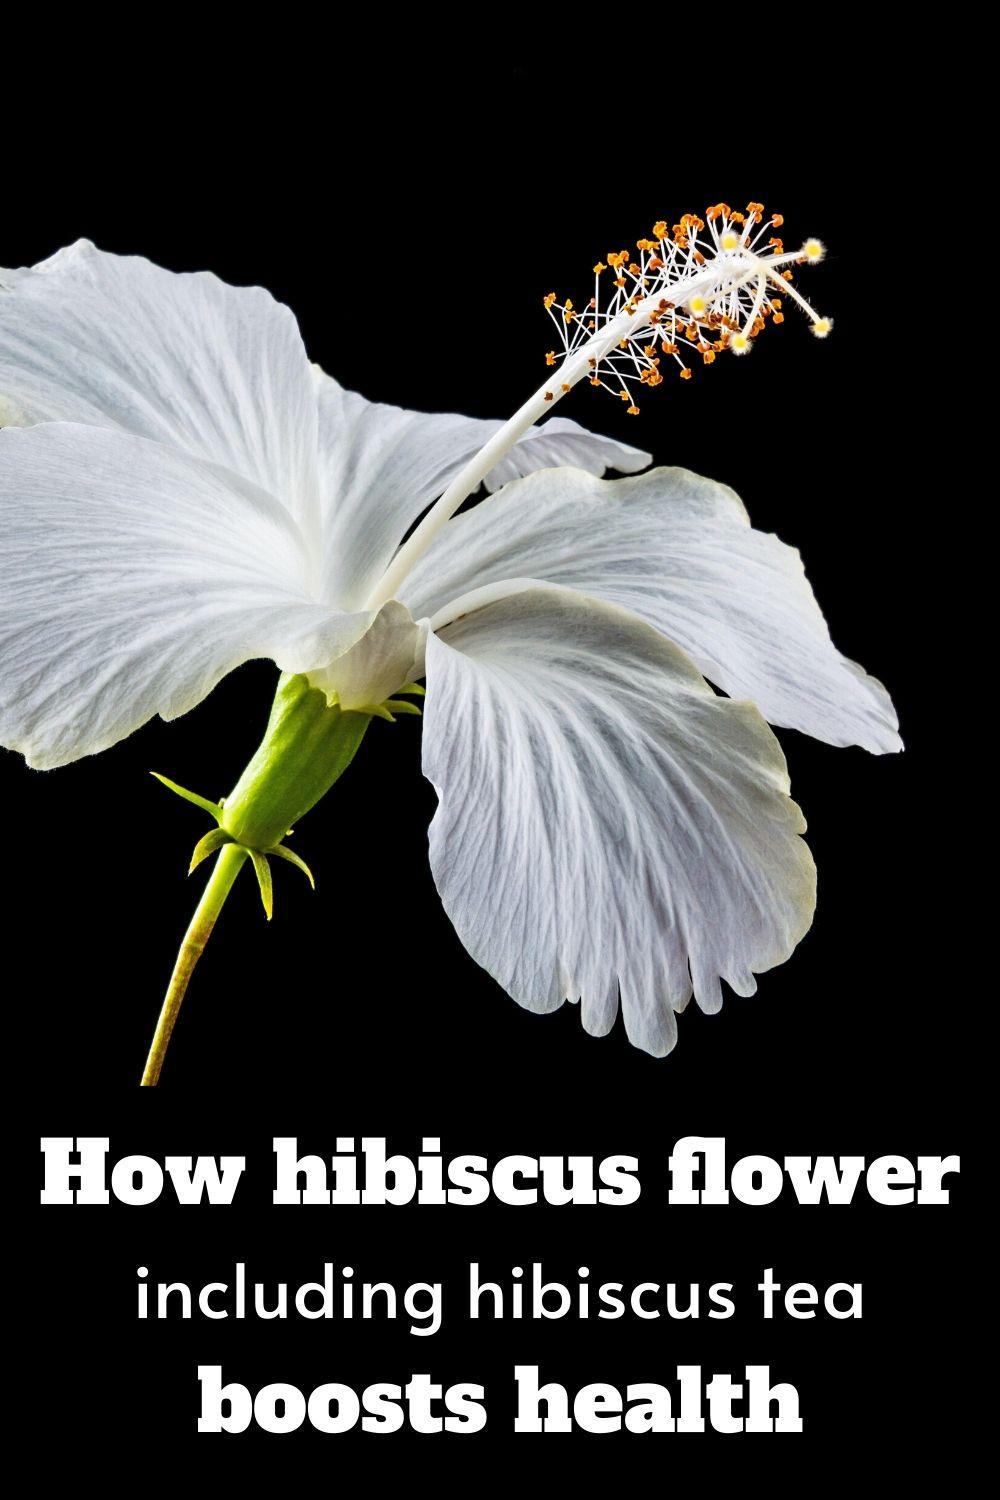 The benefits of hibiscus flower